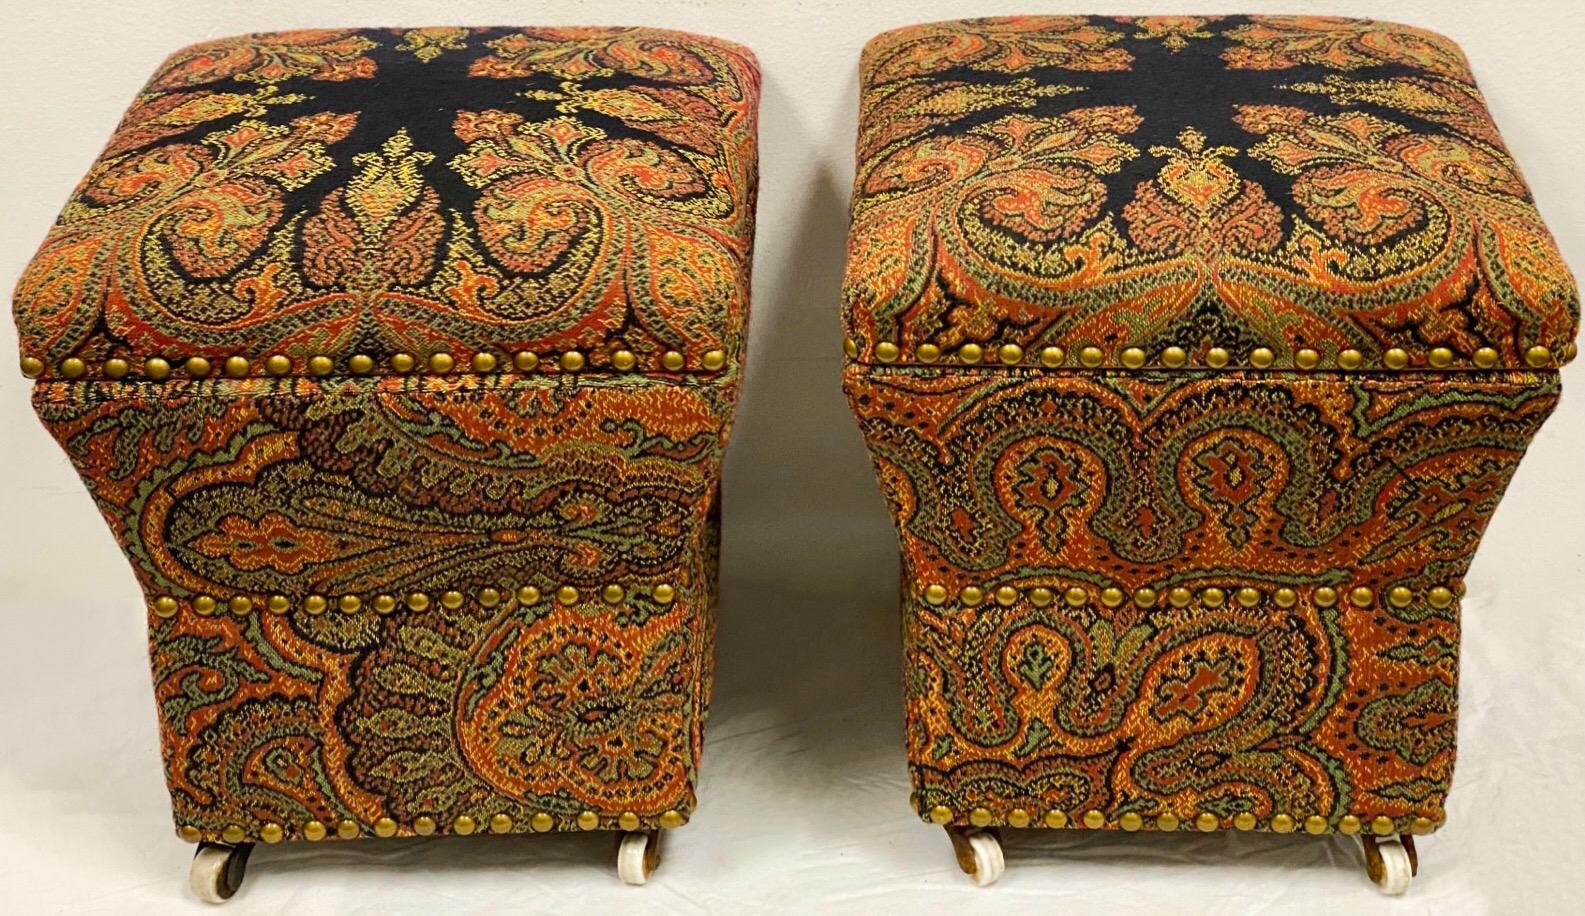 This is a pair of petite English upholstered storage ottomans on tiny castors. The paisley fabric is in very good condition as is the pink interior. They date to the 40s.